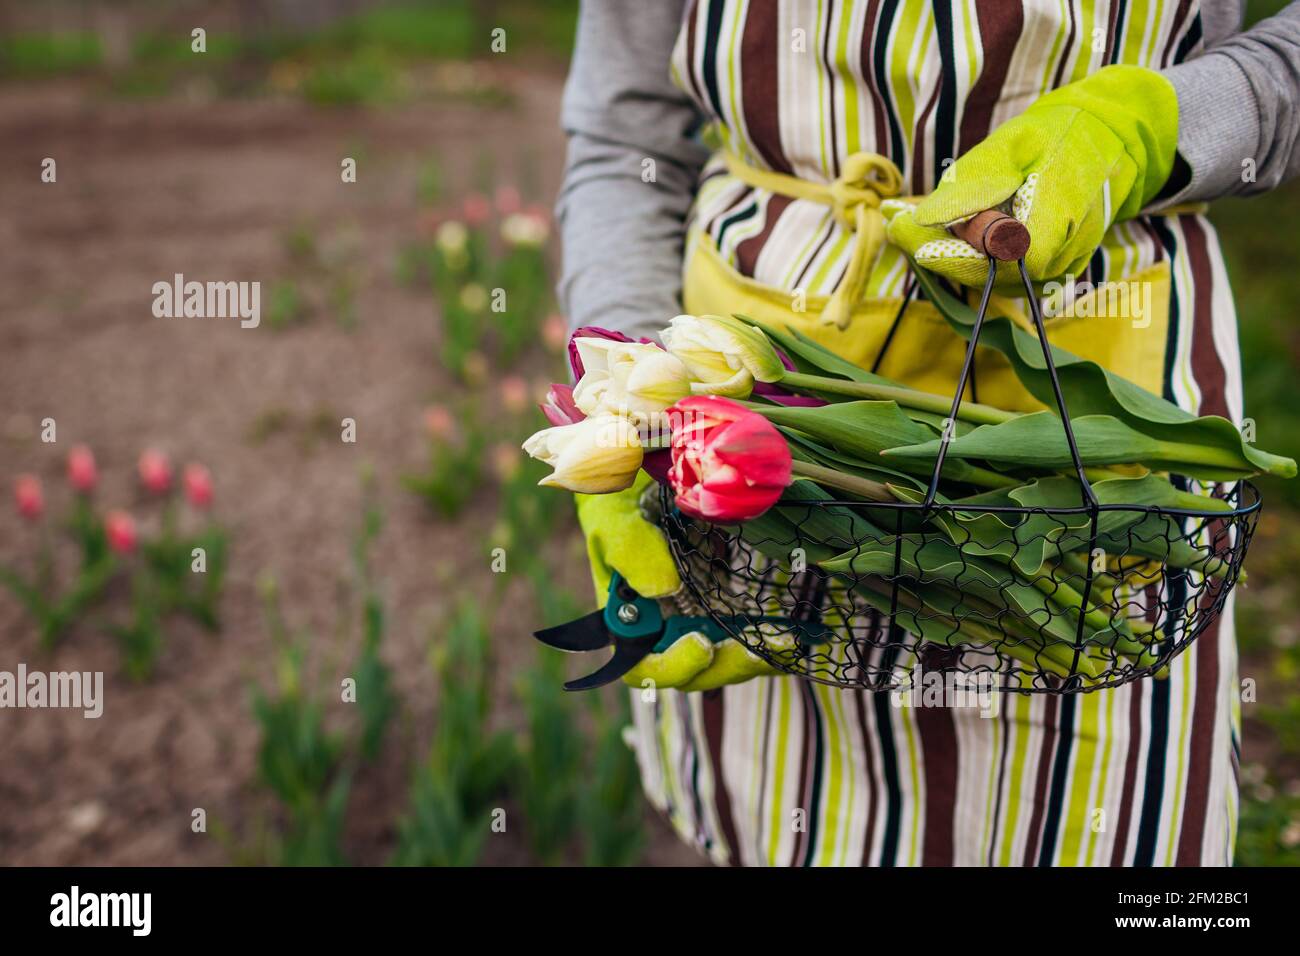 Fresh tulips gathered in metal basket in spring garden. Gardener woman holds flowers wearing gloves and apron Stock Photo